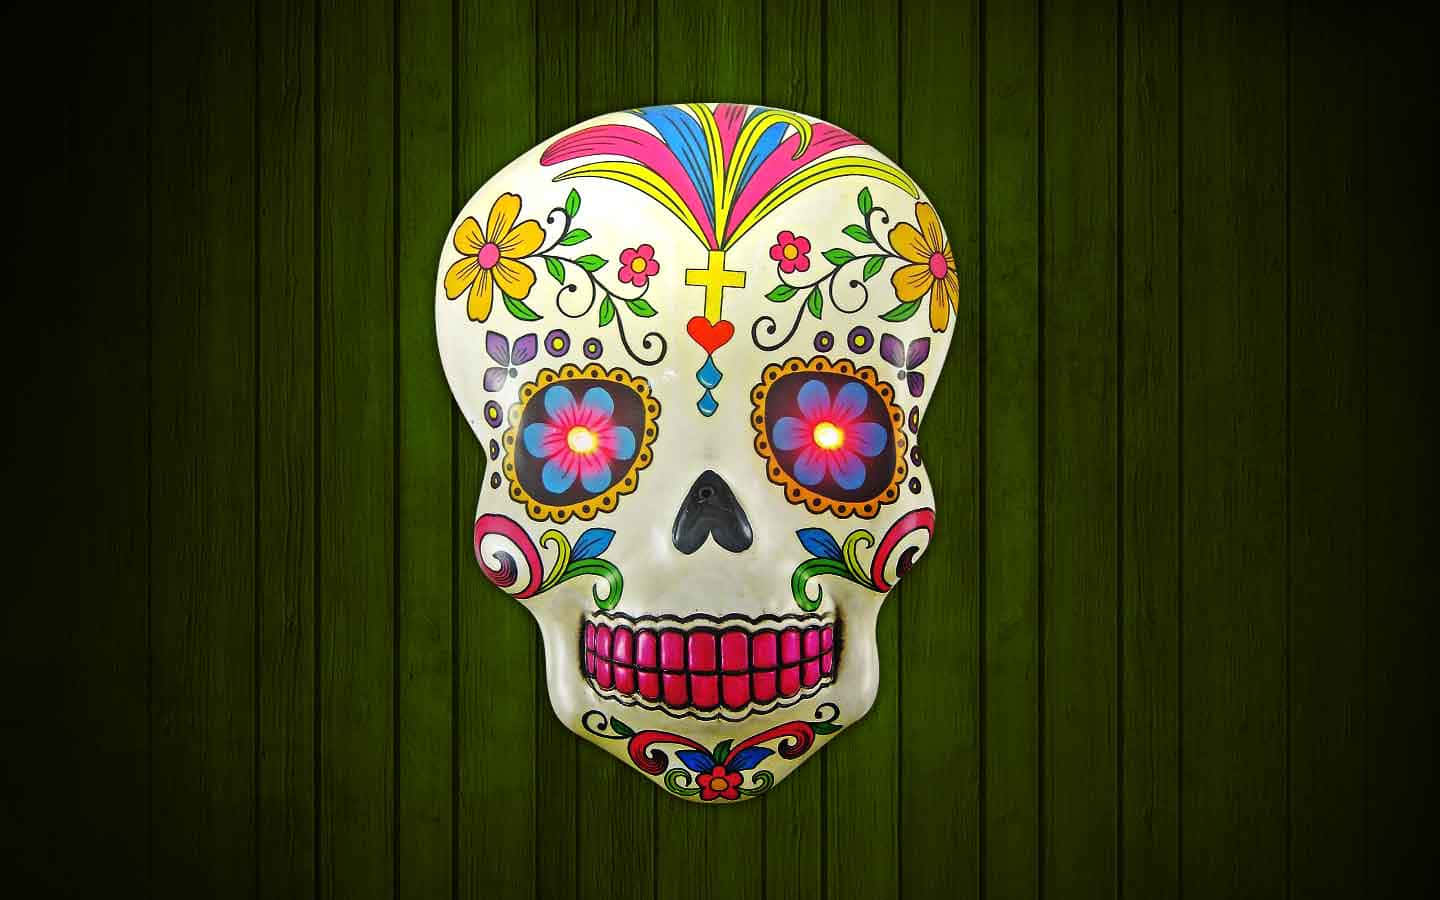 Celebrate Day of the Dead with these vibrant and colorful decorations